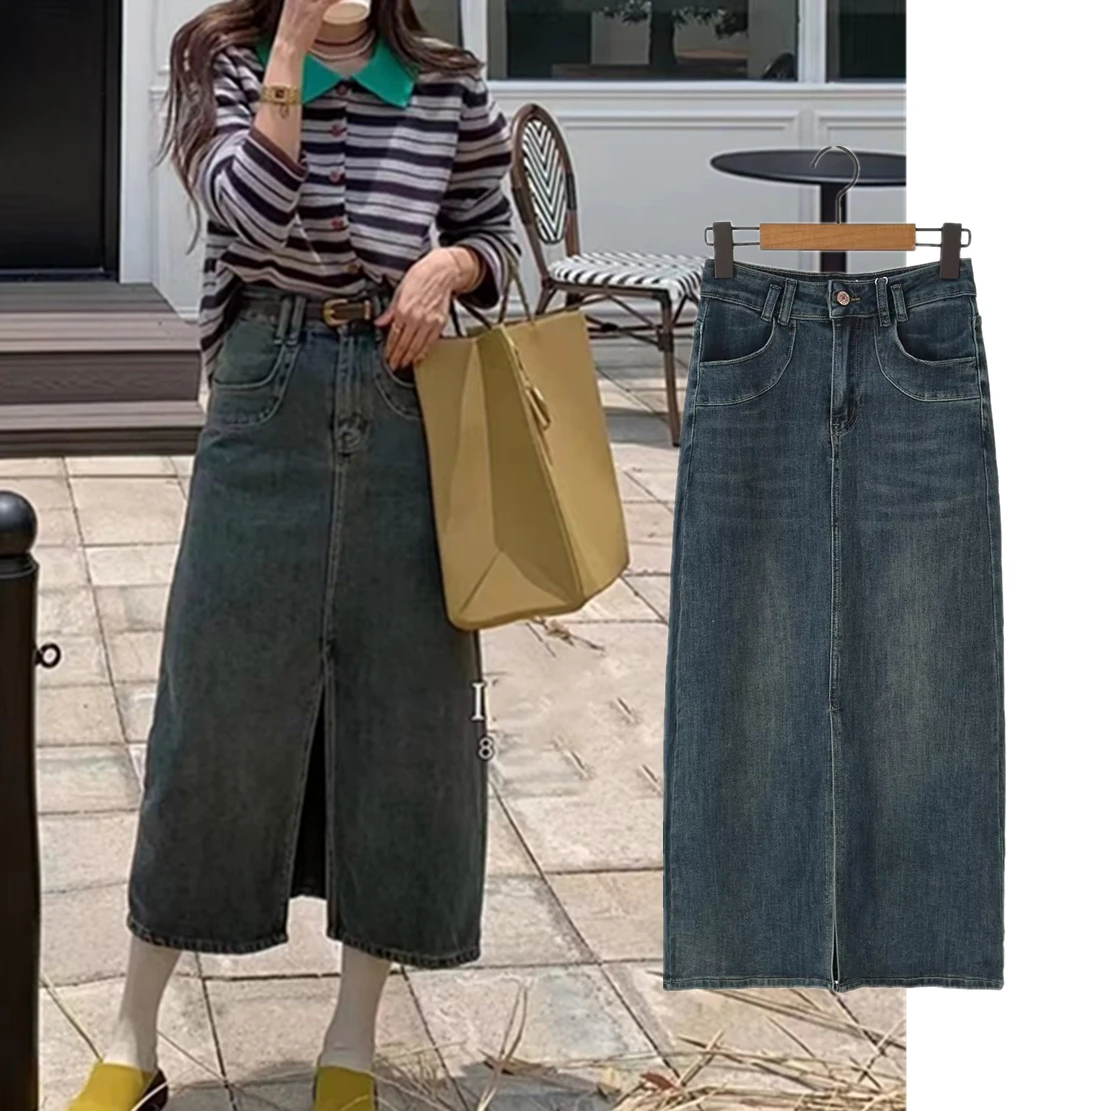 Withered Ins Fashion Blogger High Street Slit Denim Skirt High Waist Retro Washed Old Straight Midi Skirt Female contrast european and american hip hop high street fashion brand tie dyed jeans women s american retro straight tube loose wide